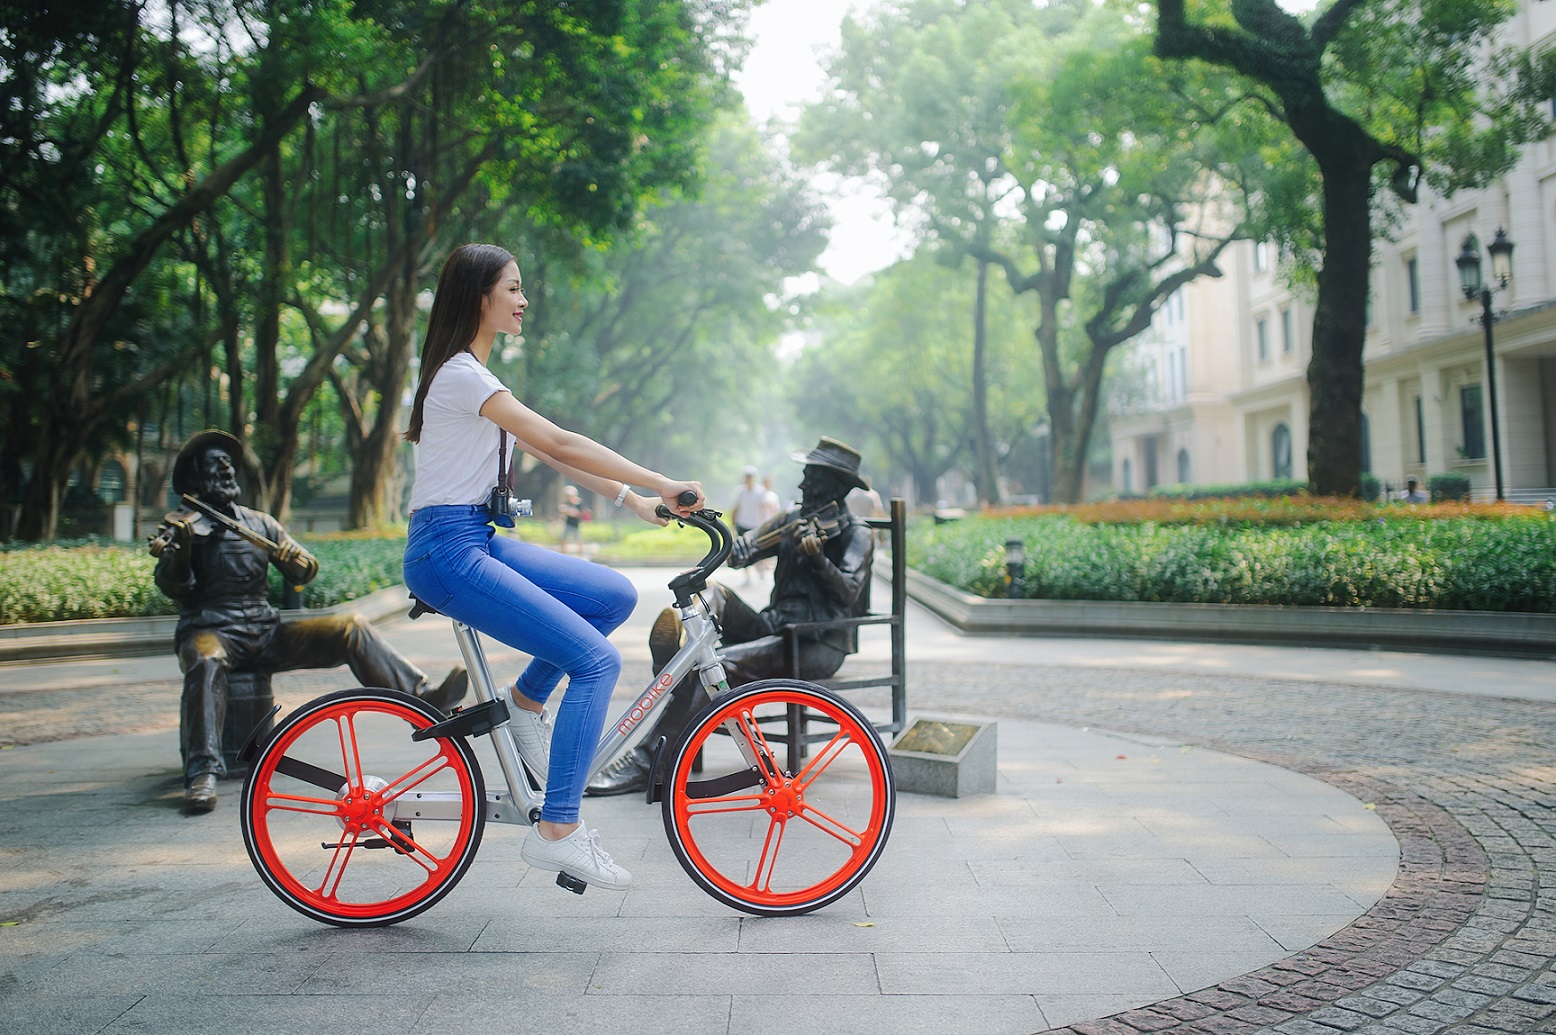 Mobike, Gemalto bring IoT connectivity to bike-sharing services beyond China